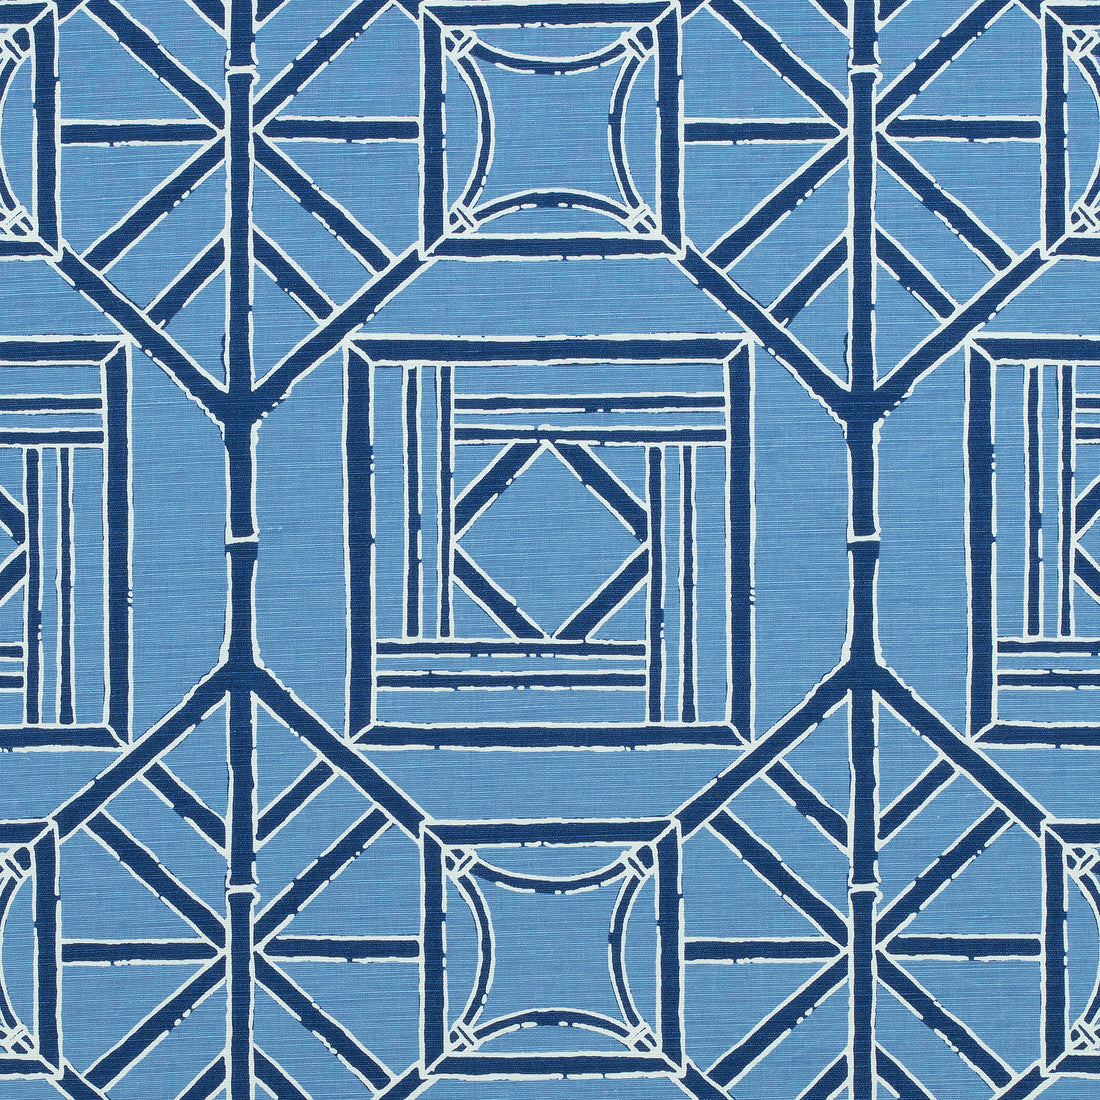 Shoji Panel fabric in blue and navy color - pattern number F975522 - by Thibaut in the Dynasty collection